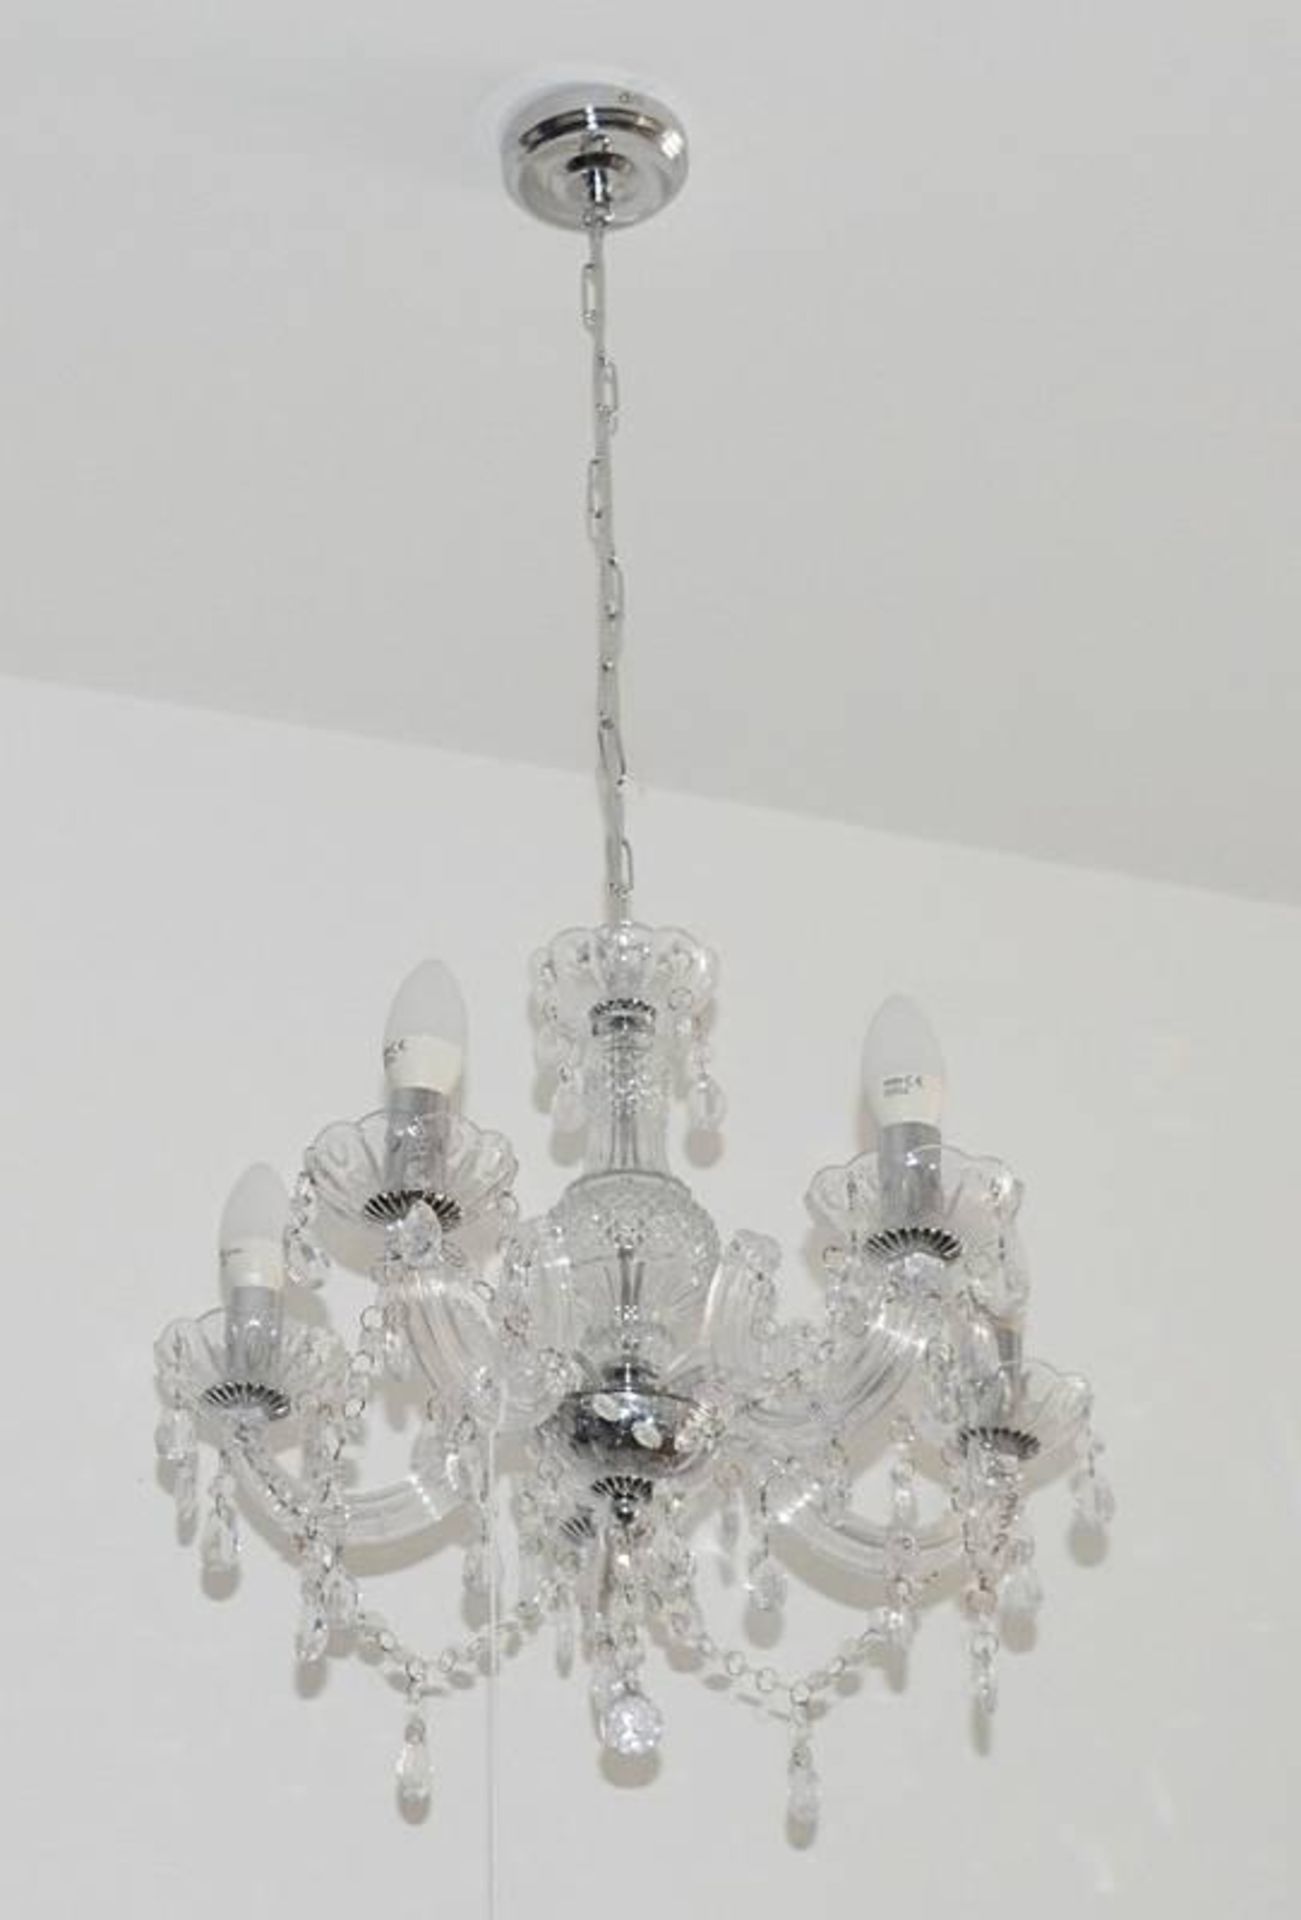 1 x MARIE THERESE Clear 5-Light Chandelier With Clear Acrylic Drops - Product Code 1455-5CL - New Bo